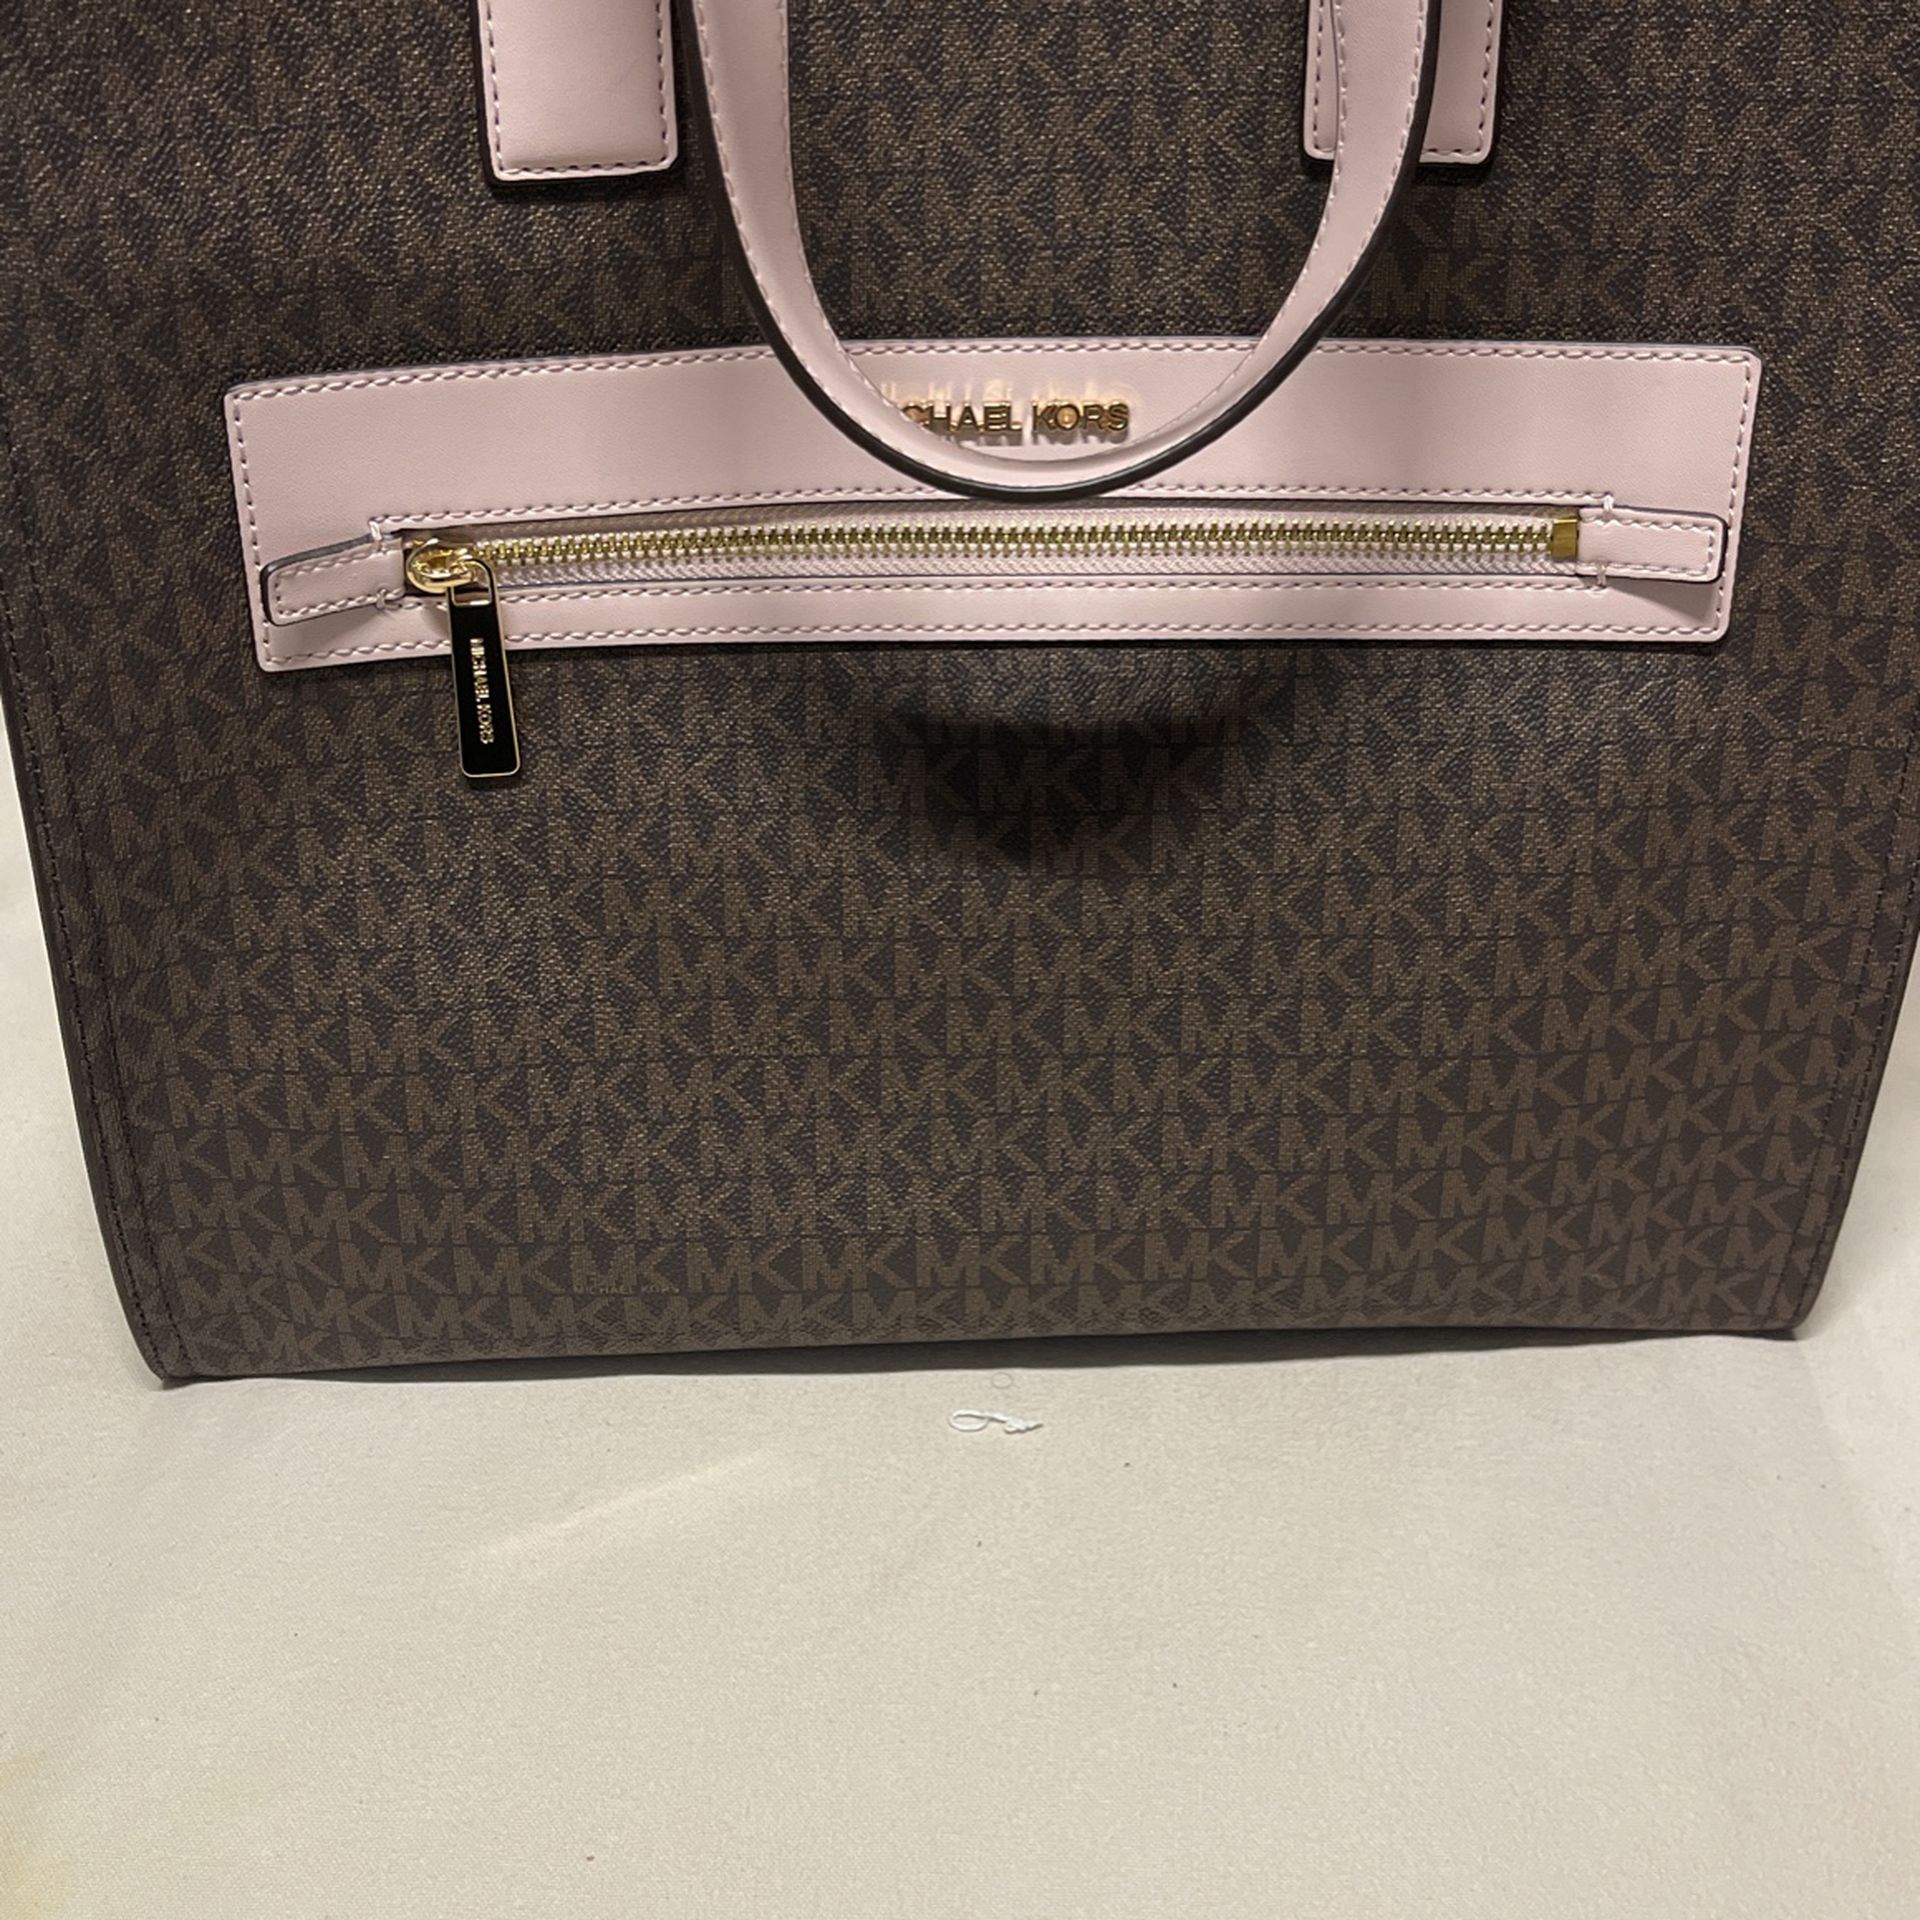 Michael Kors Charlotte Large Tote for Sale in Uppr Chichstr, PA - OfferUp